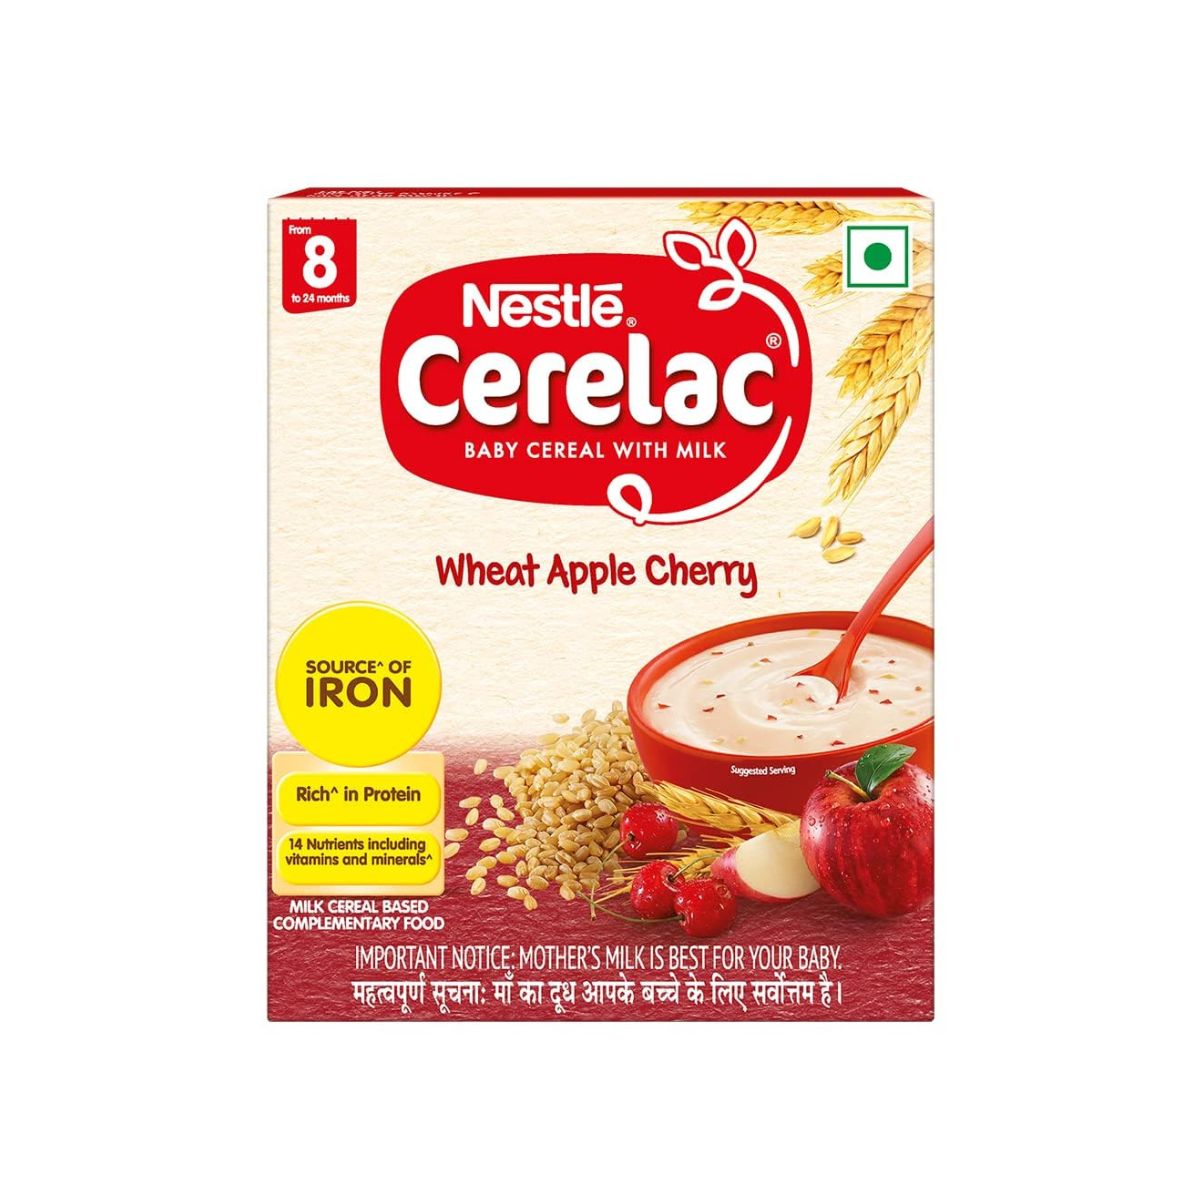 Nestle Cerelac - Baby Cereal With Cereal With Milk - Wheat Apple Cherry - Source Of Iron - 300g